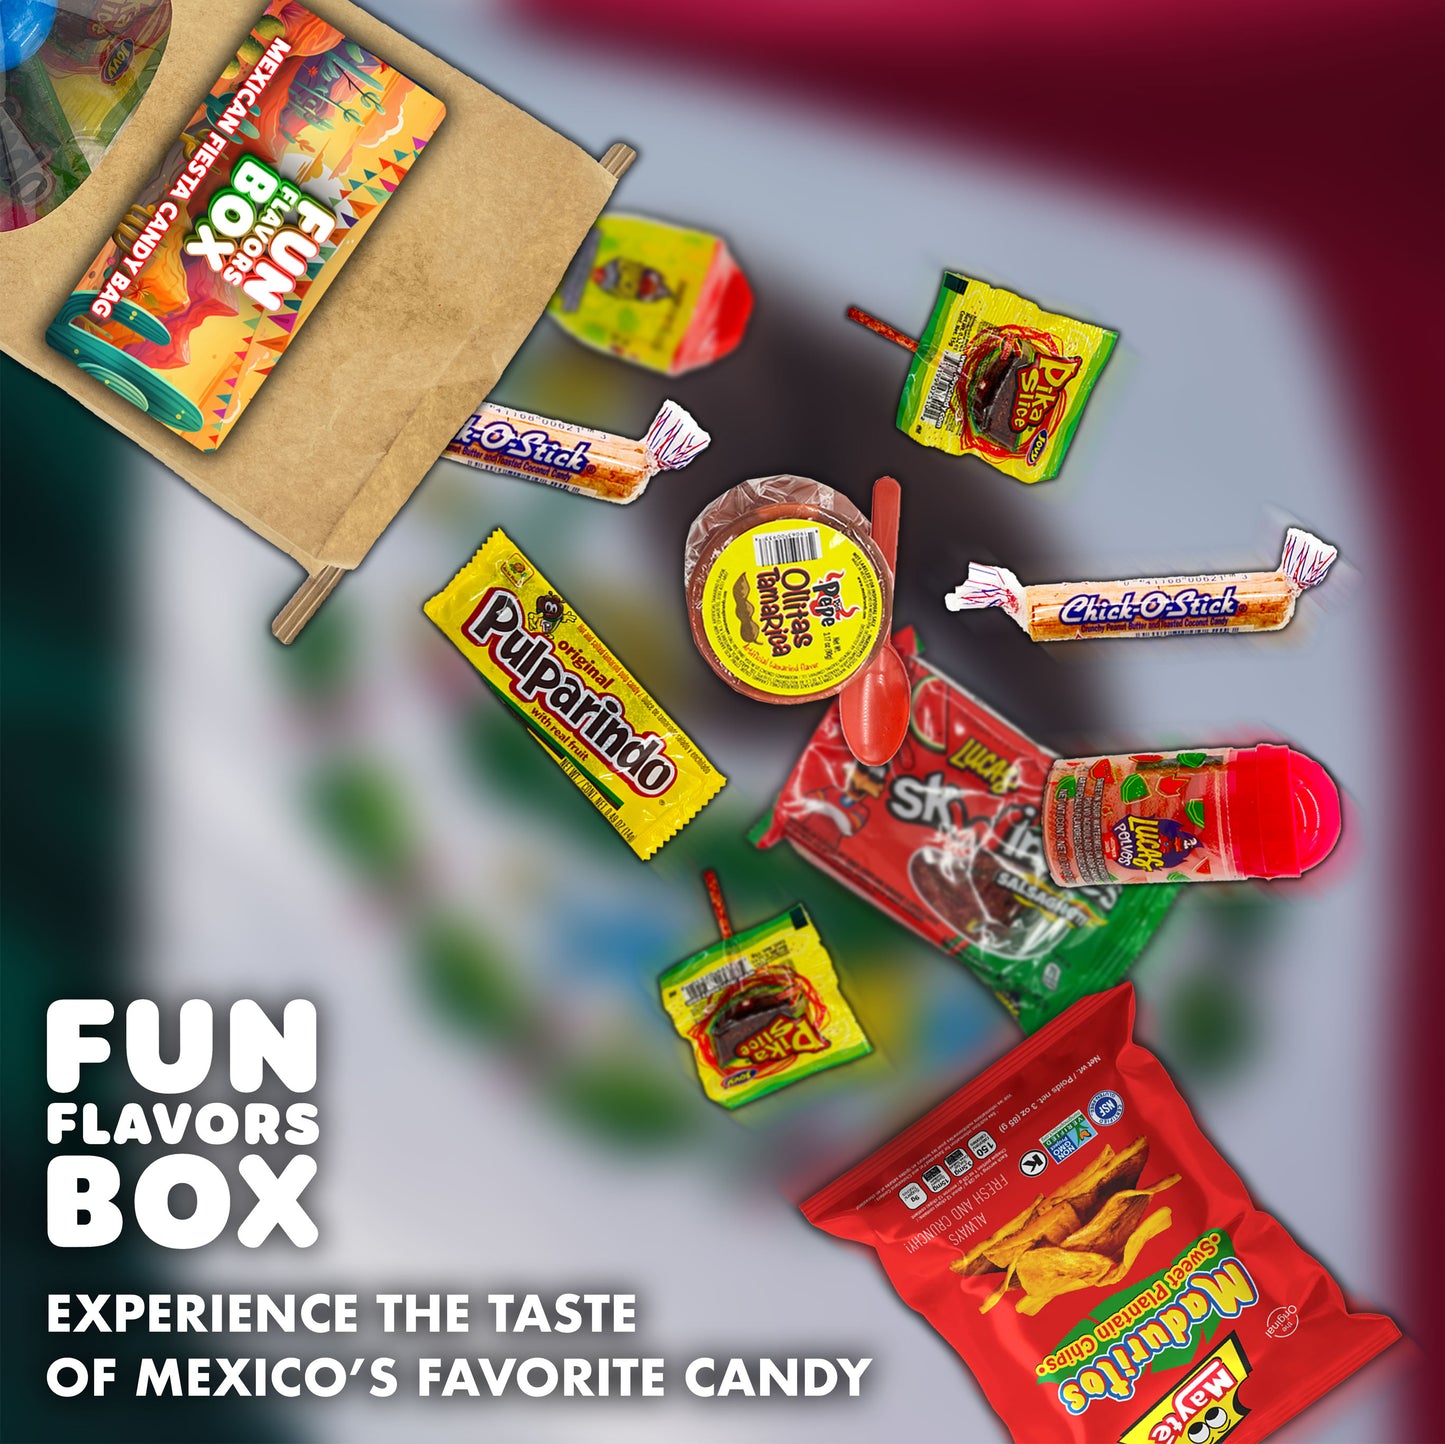 Cinco de Mayo Mexican Fiesta Candy Bag, Spicy, Sweet and Sour Treats with Mystery Rubber Duck